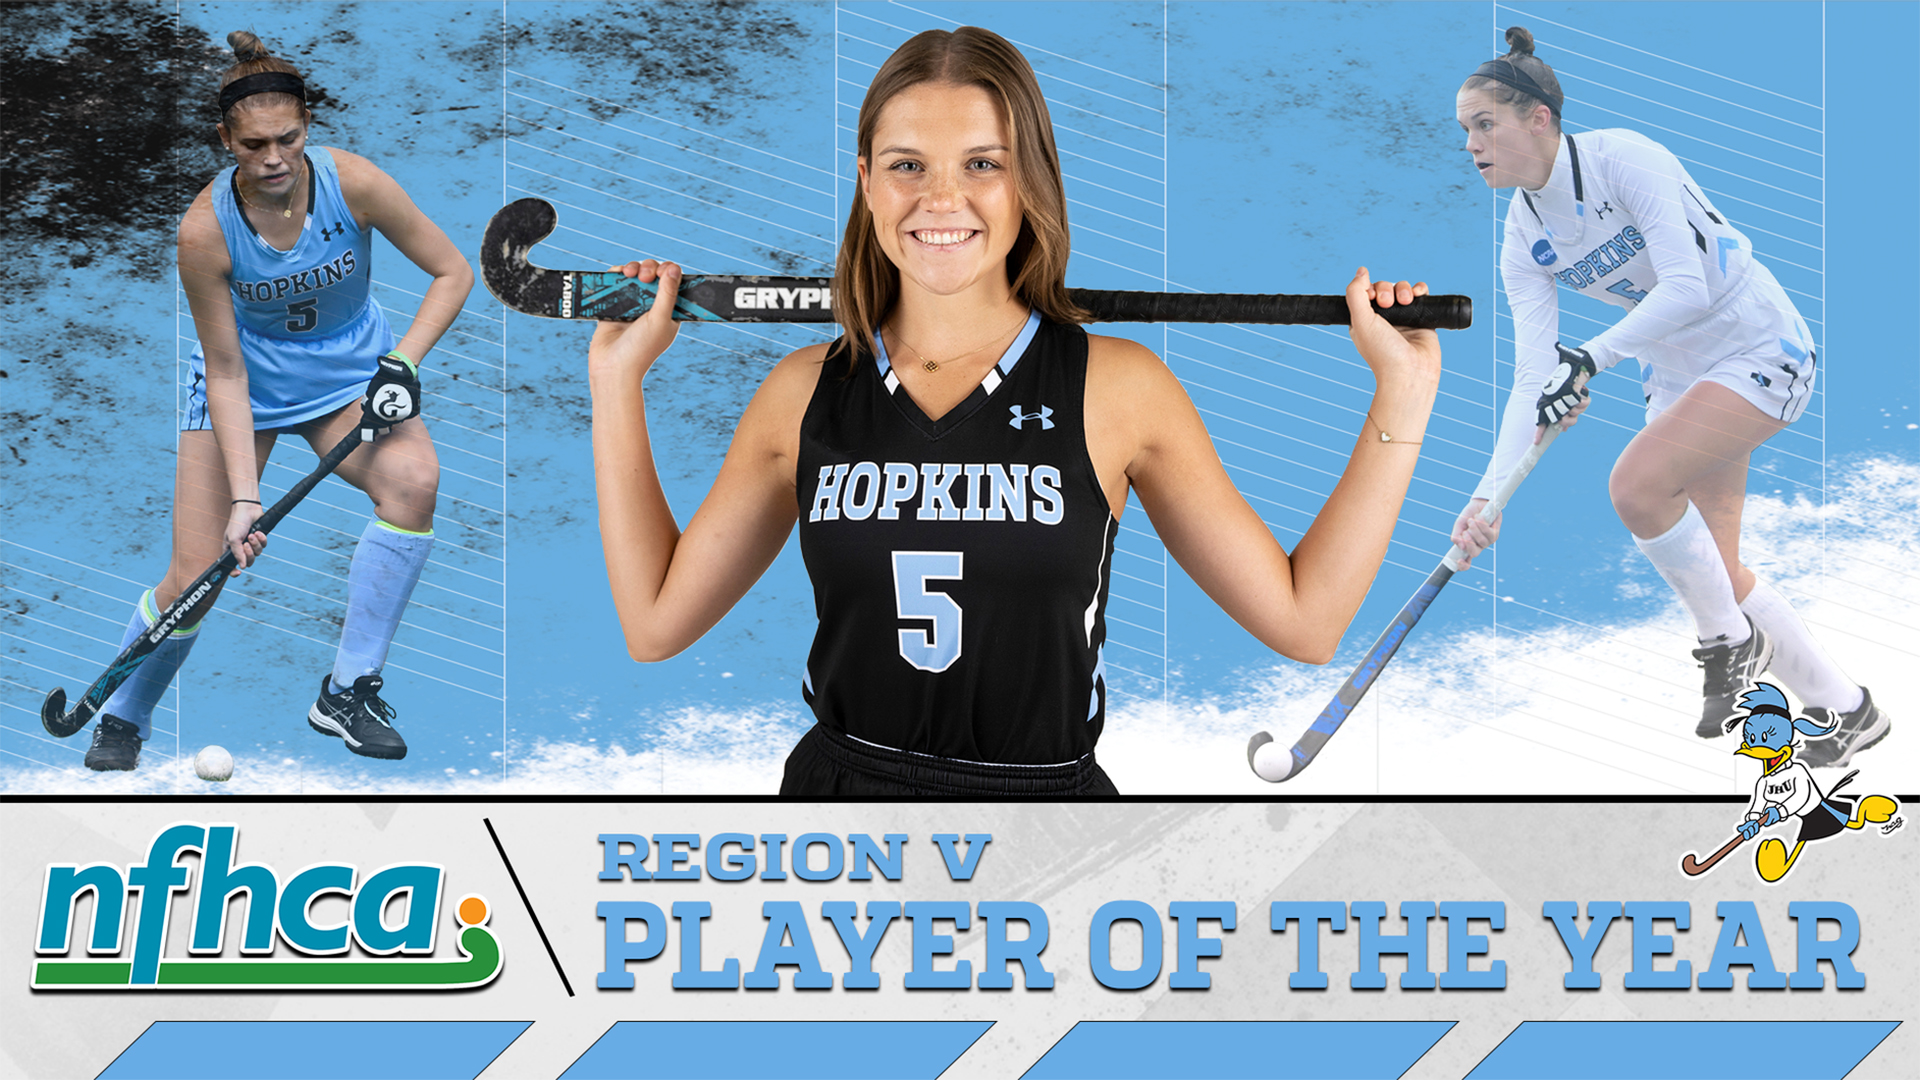 JHU's Birk Repeats as Regional Player of the Year